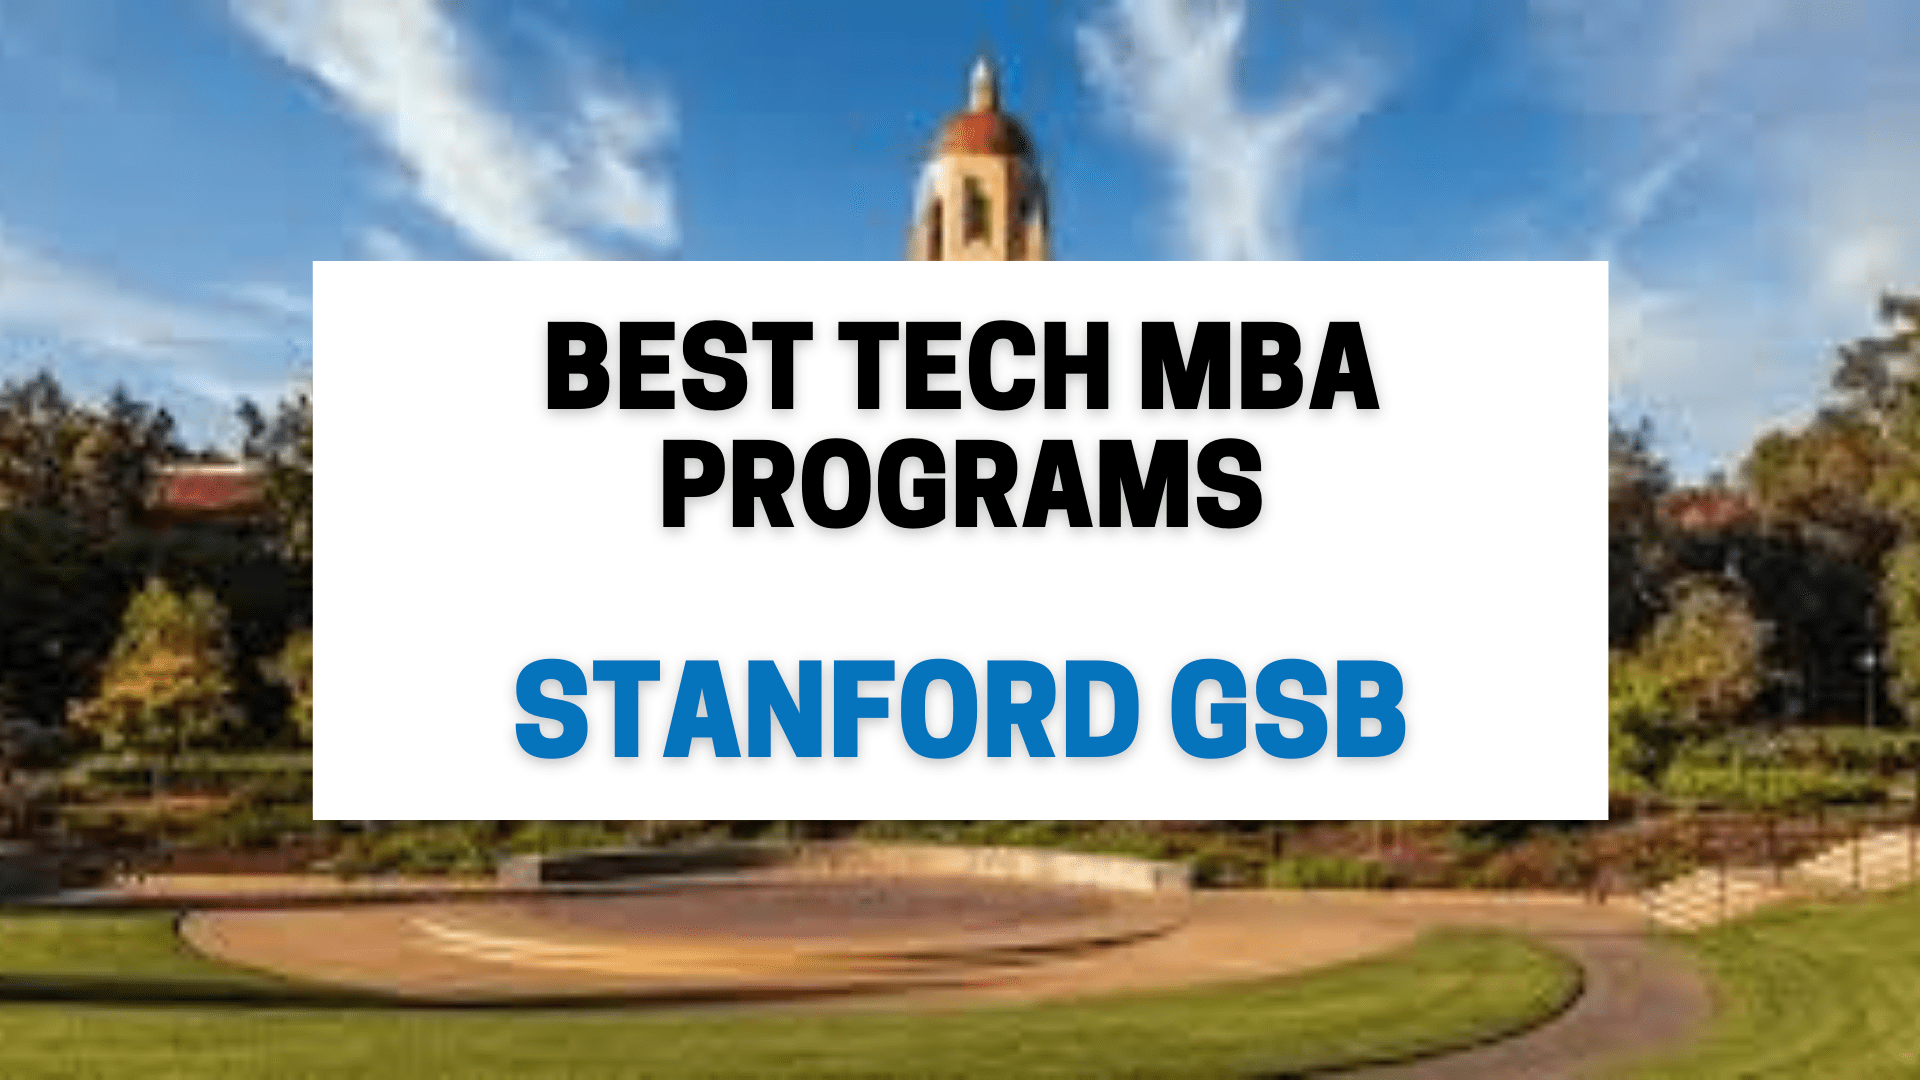 Top MBA institutes in the world